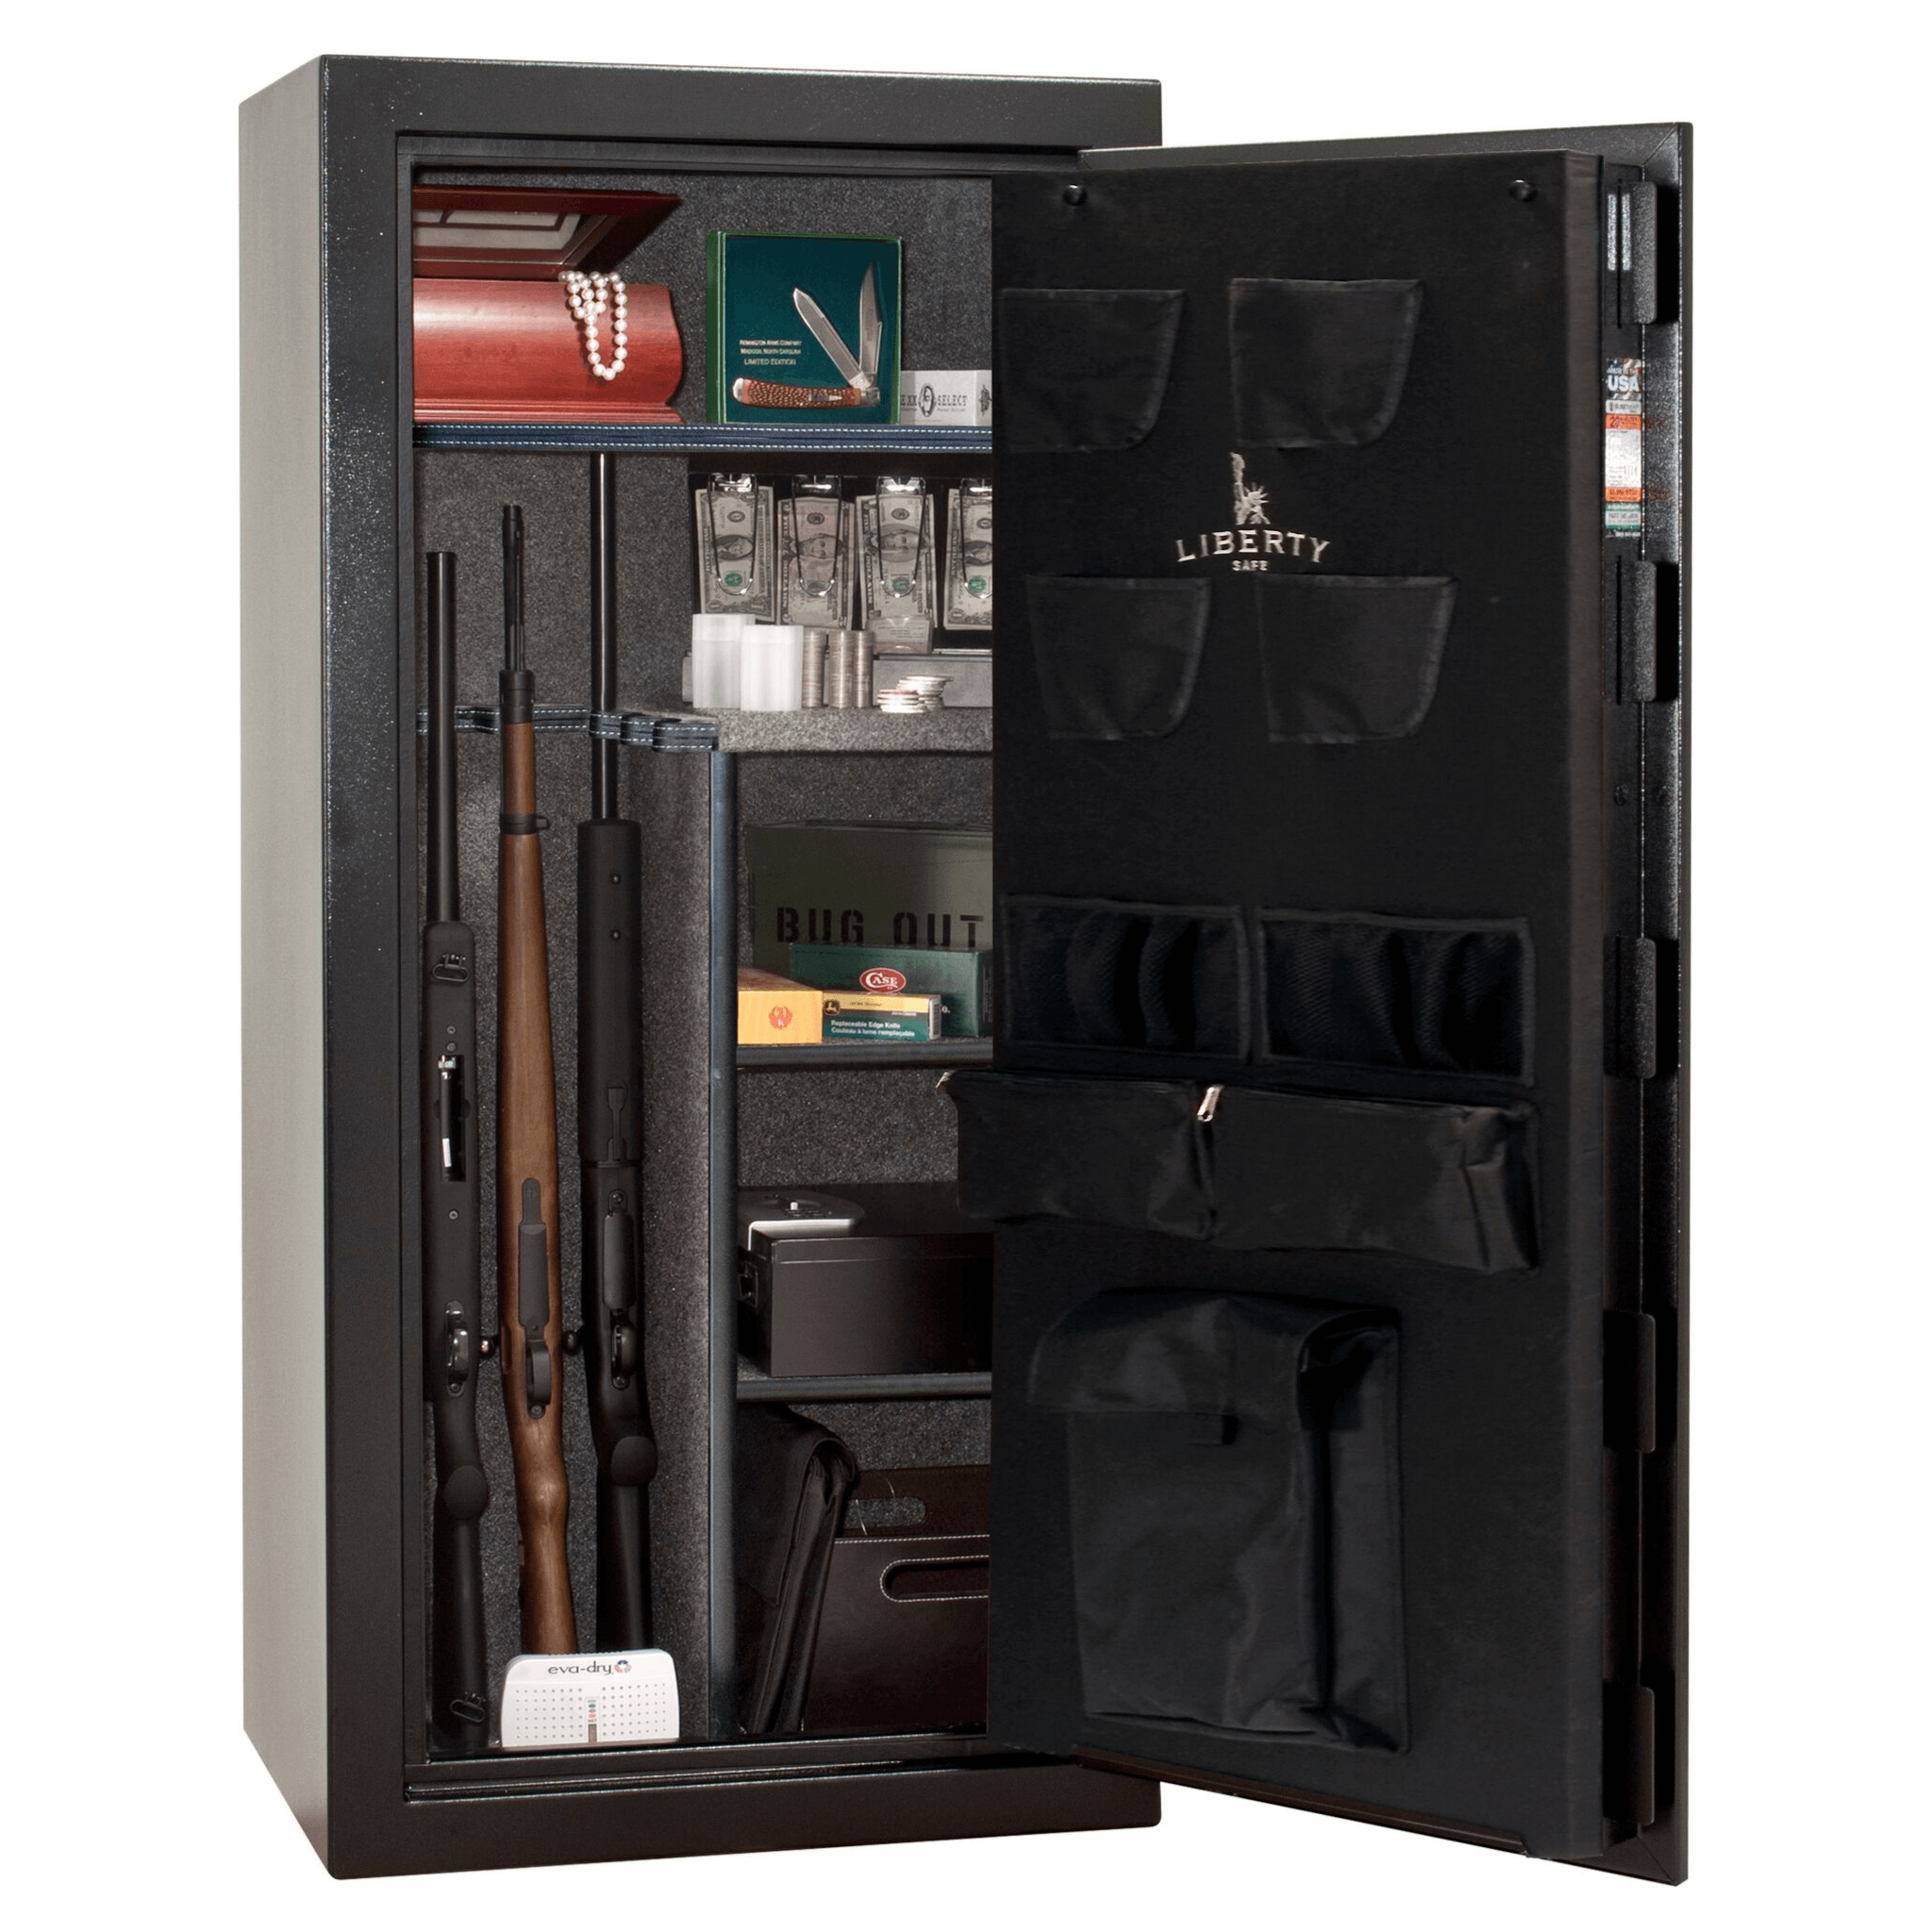 Liberty Centurion DLX 24 Black with Chrome Electronic Lock Gun Safe - OUT THE DOOR, image 2 